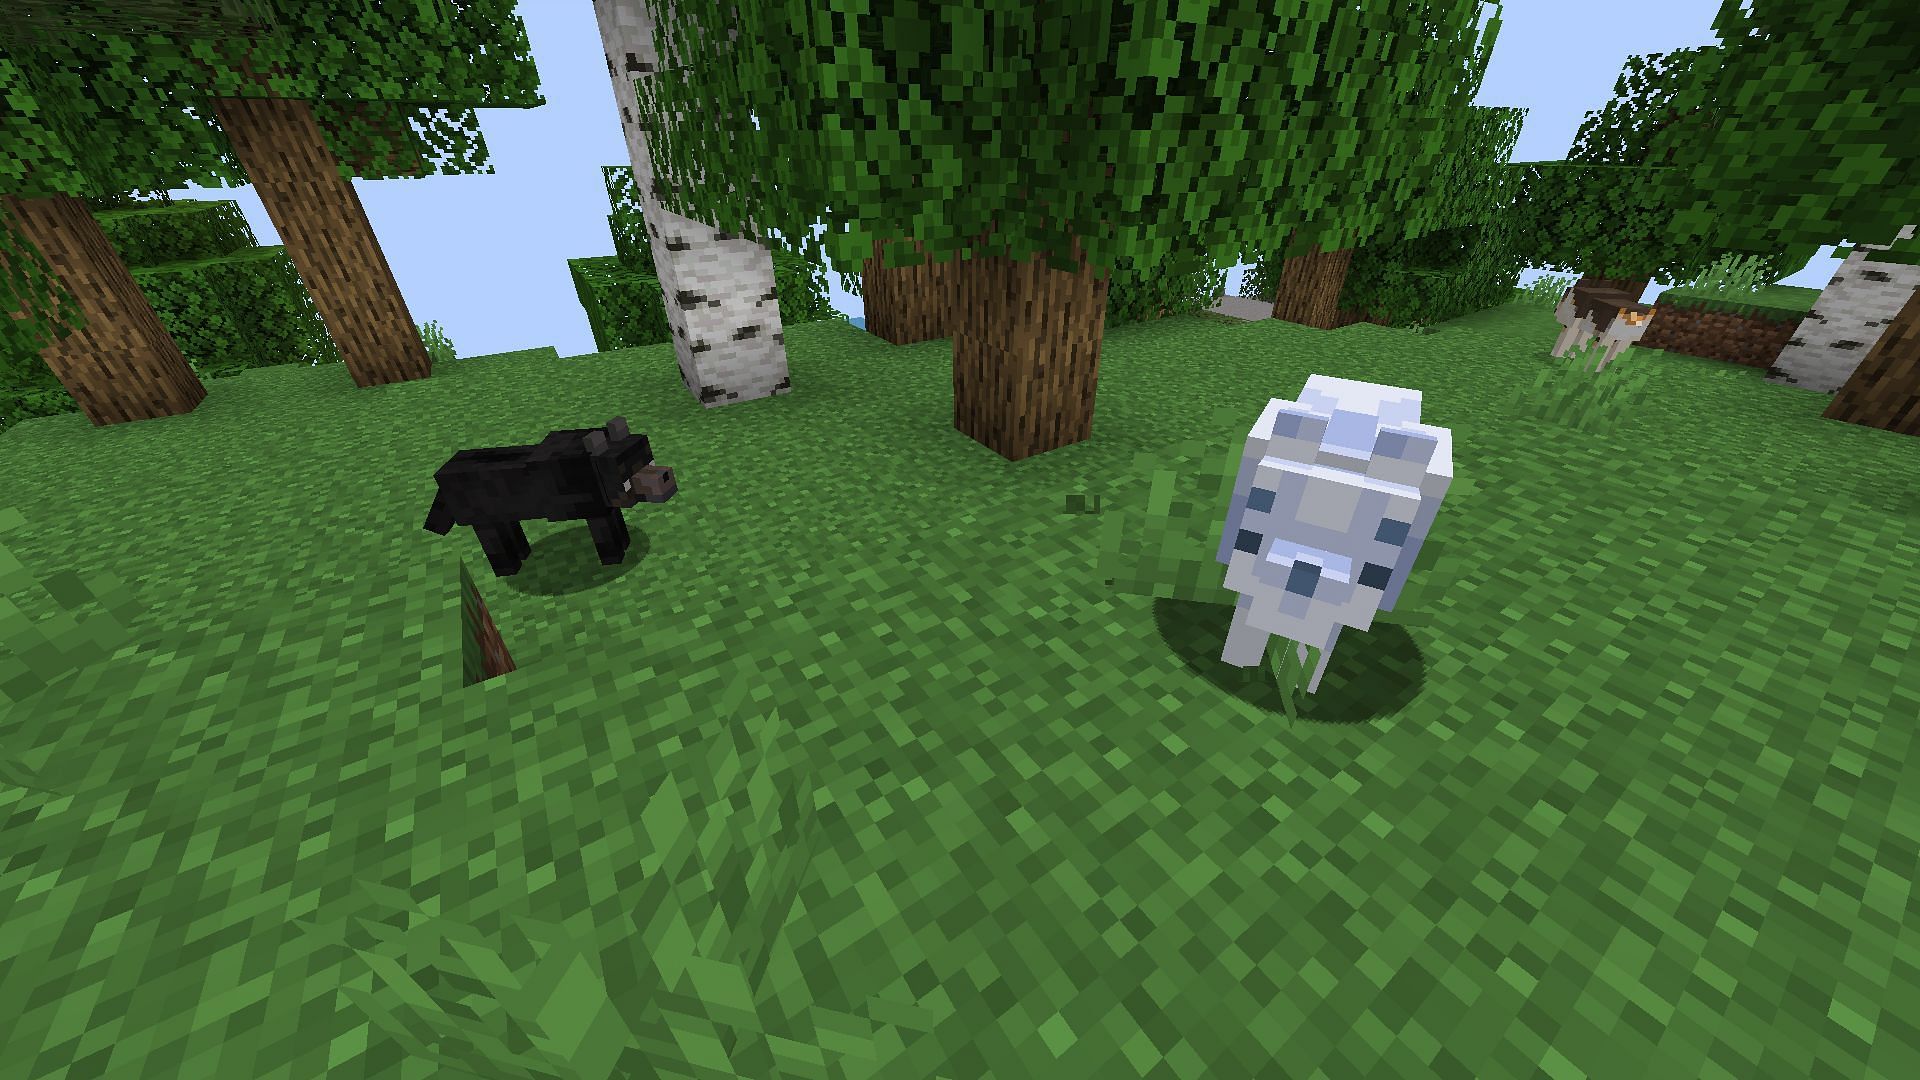 This resource pack only adds different skins without changing the shape and size of dogs in Minecraft (Image via Mojang)